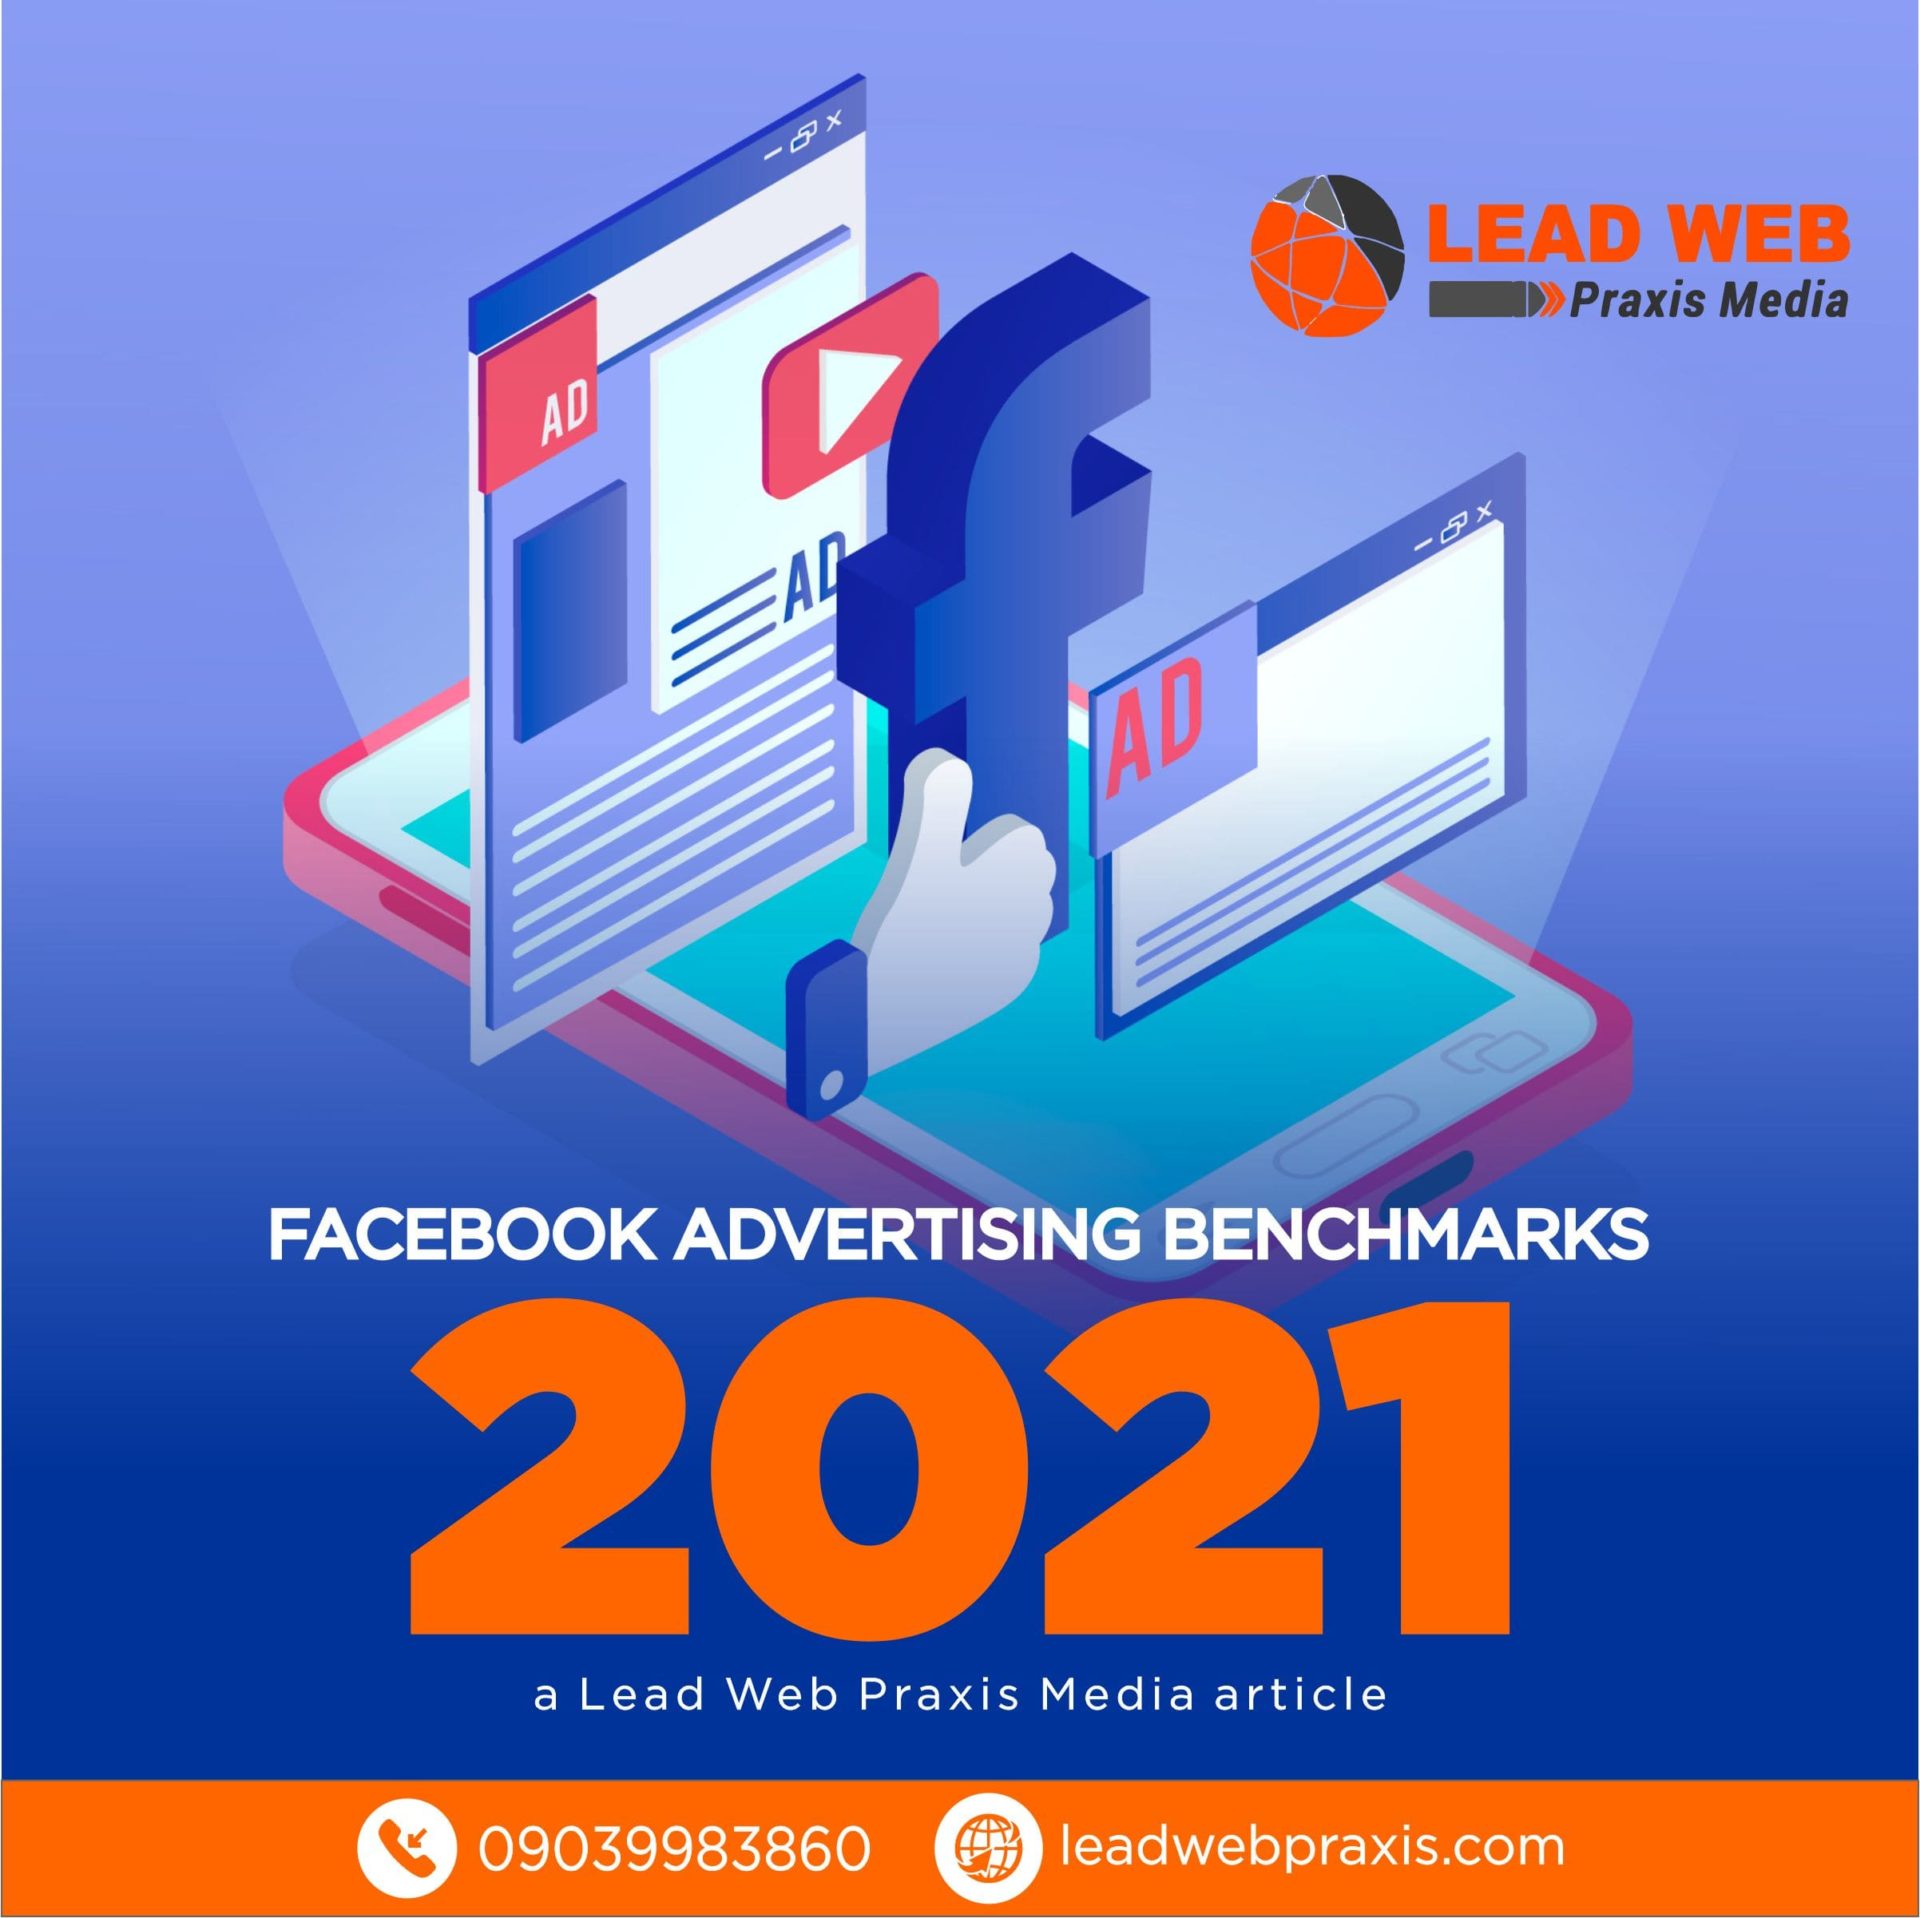 Facebook Advertising Benchmarks benchmarks you should take note of